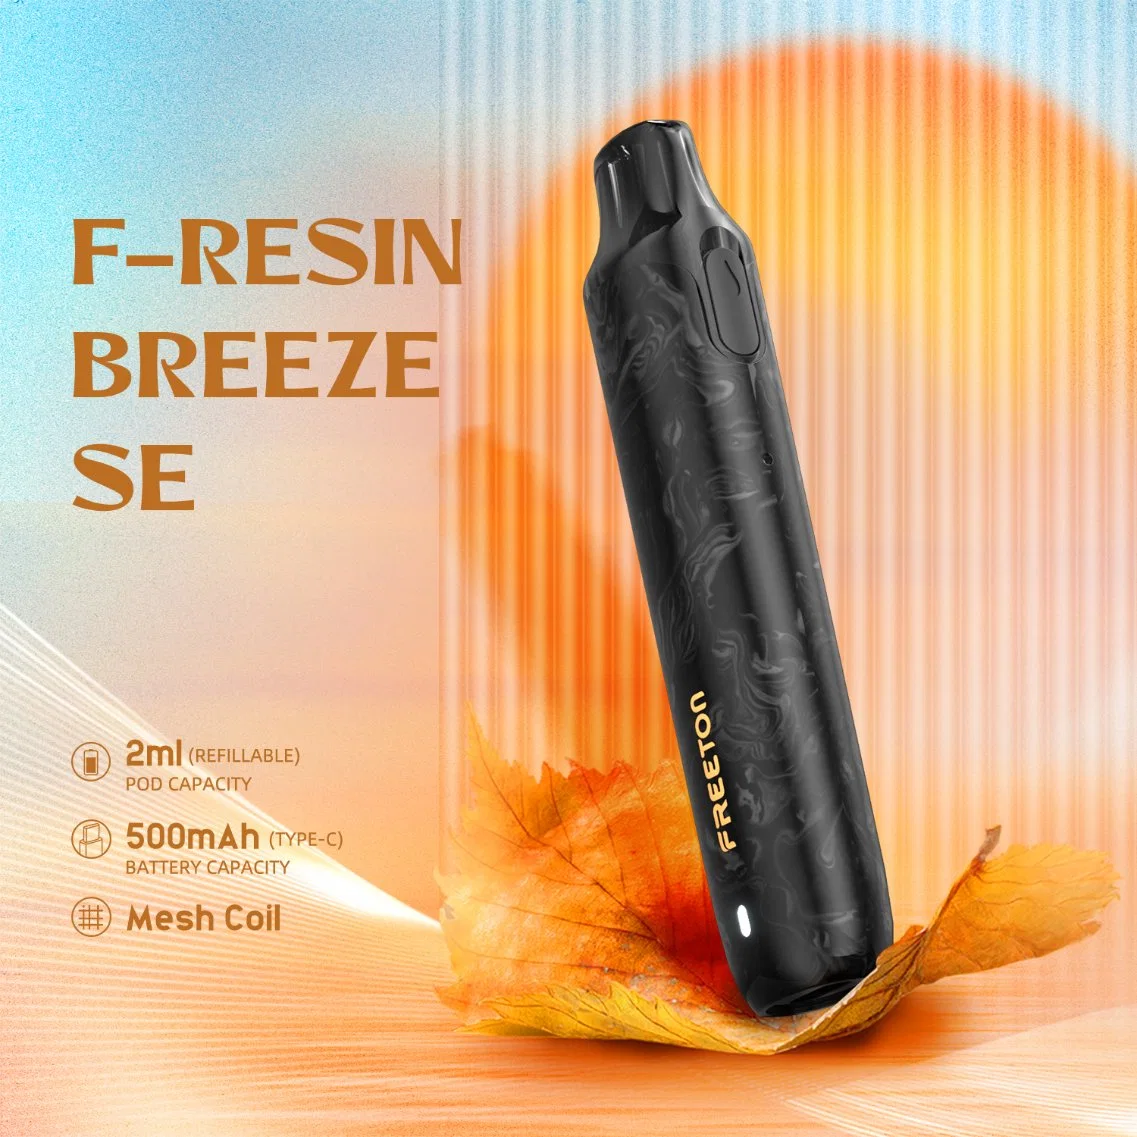 Top Atomization Function New Innovation Resin Material Hot-Selling Refillable Vape Pen in Black Color with Texture